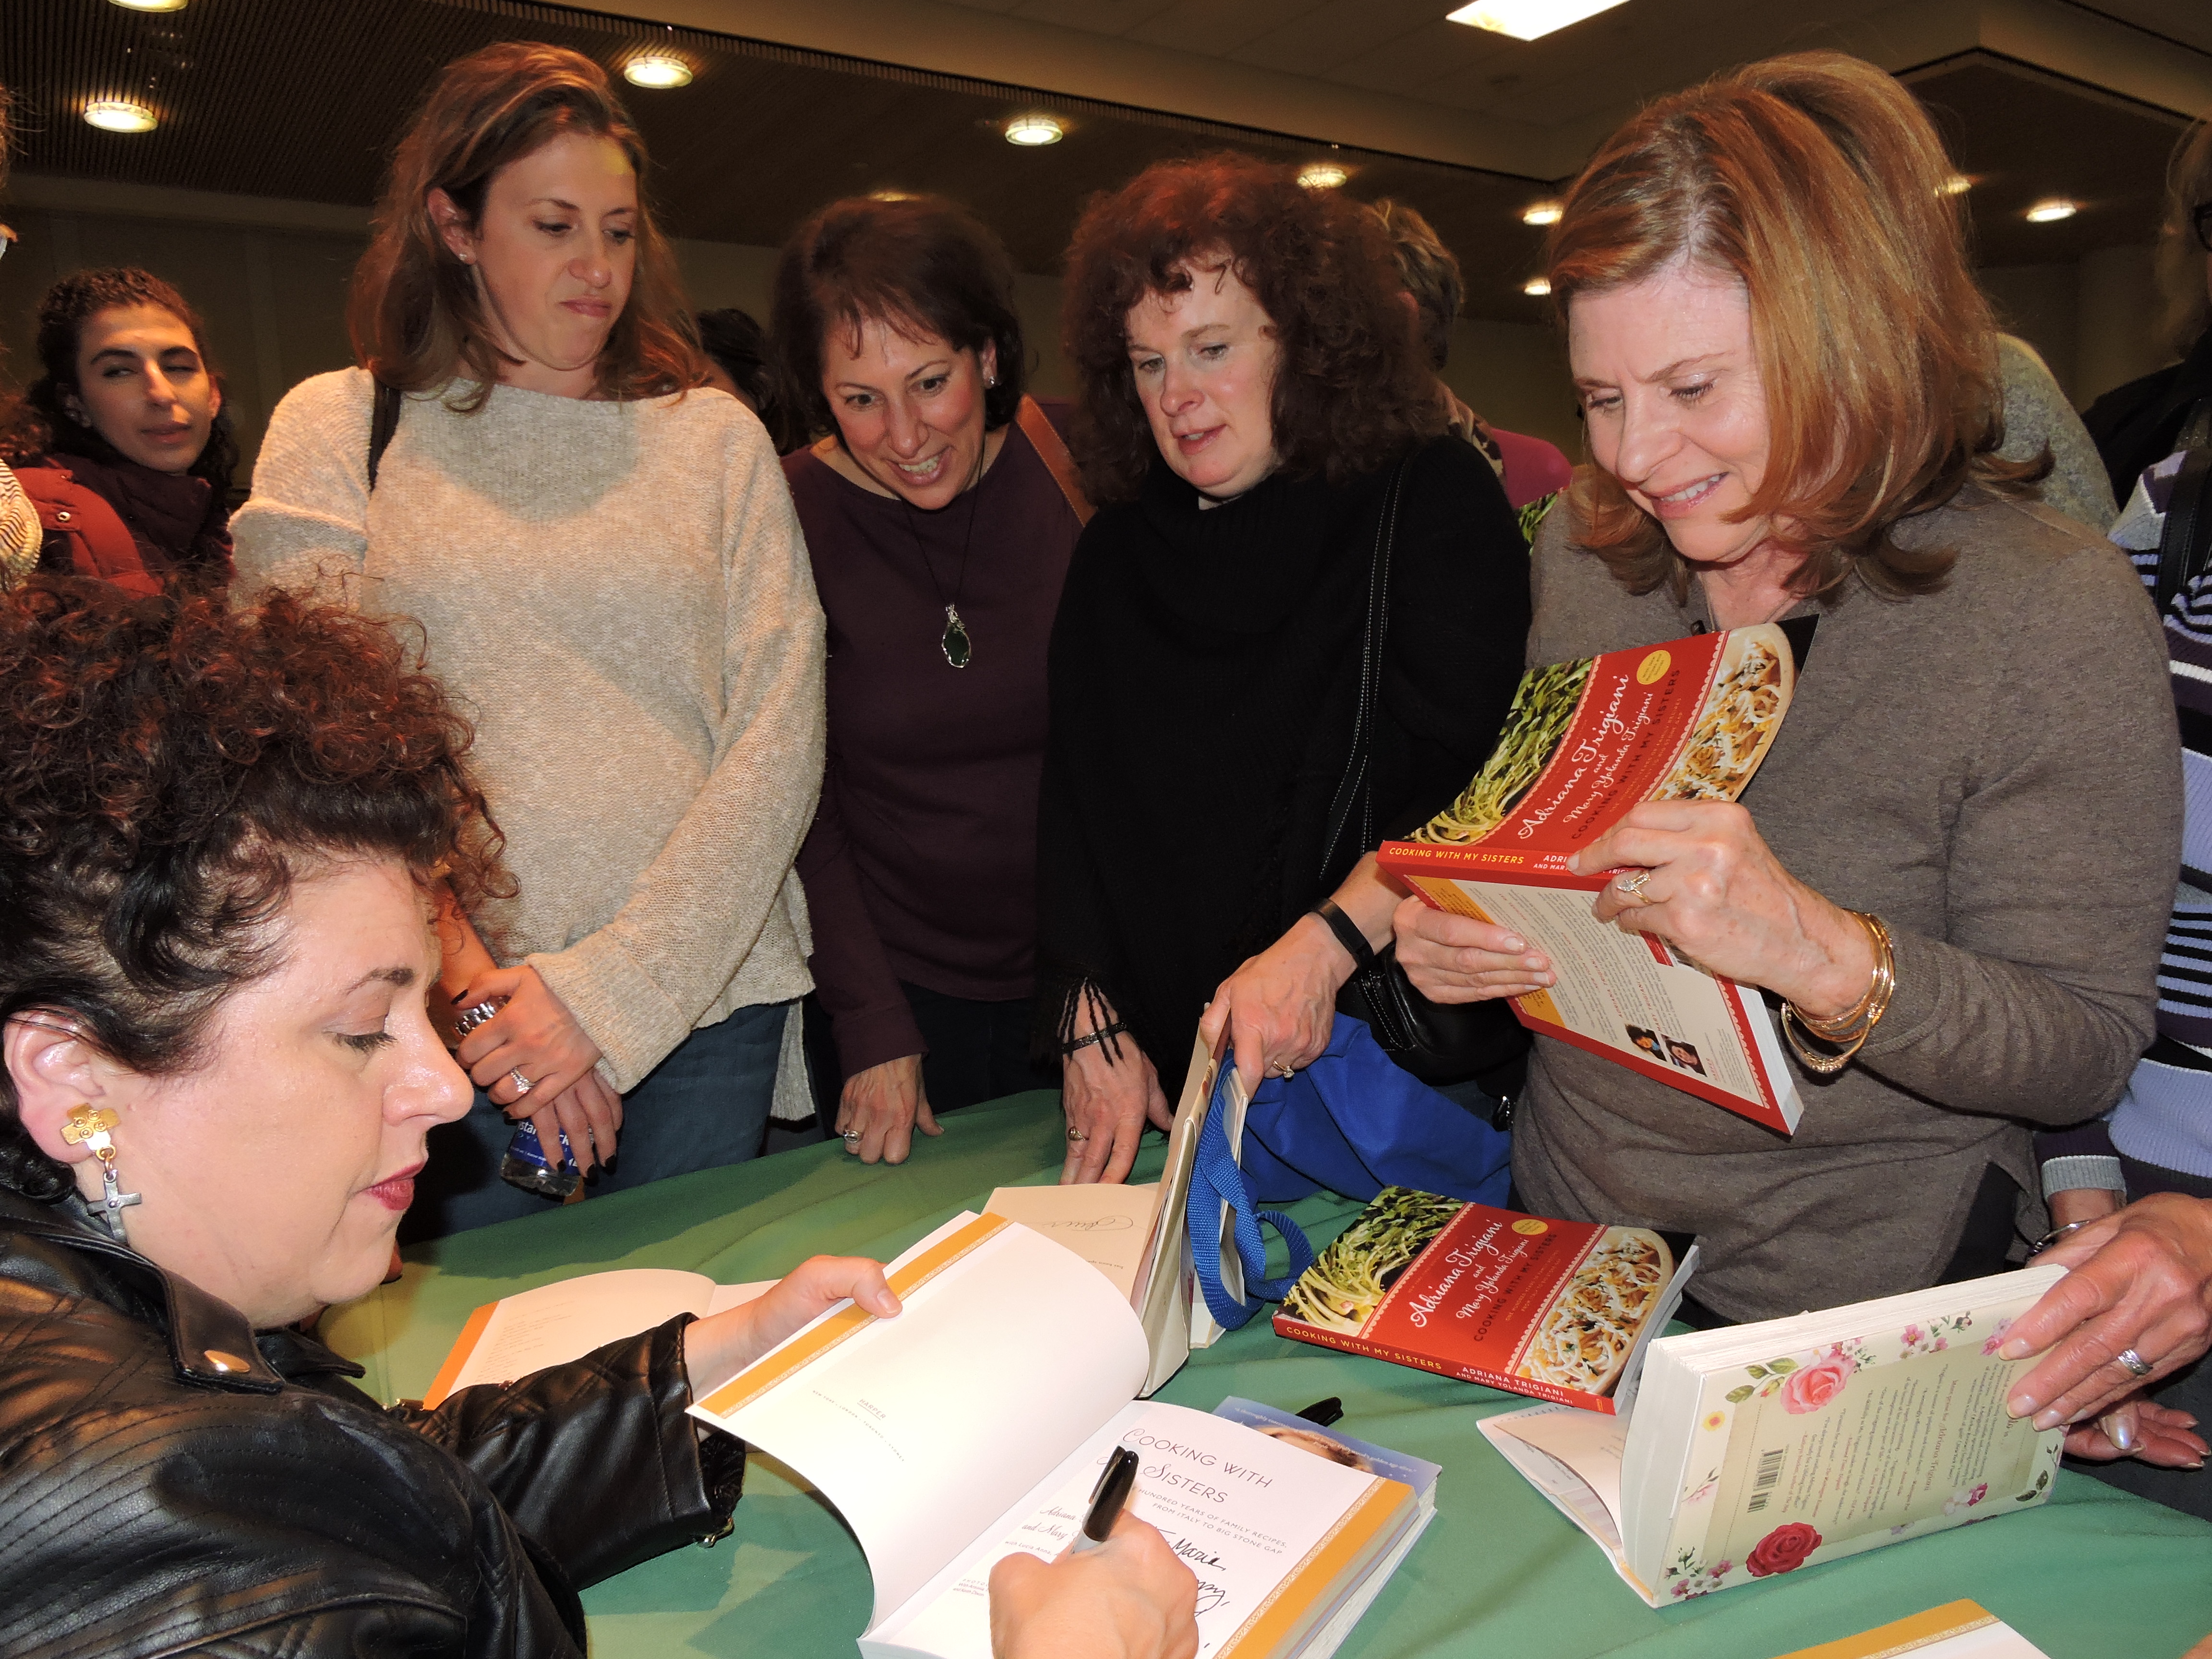 Author Adriana signing books at library event